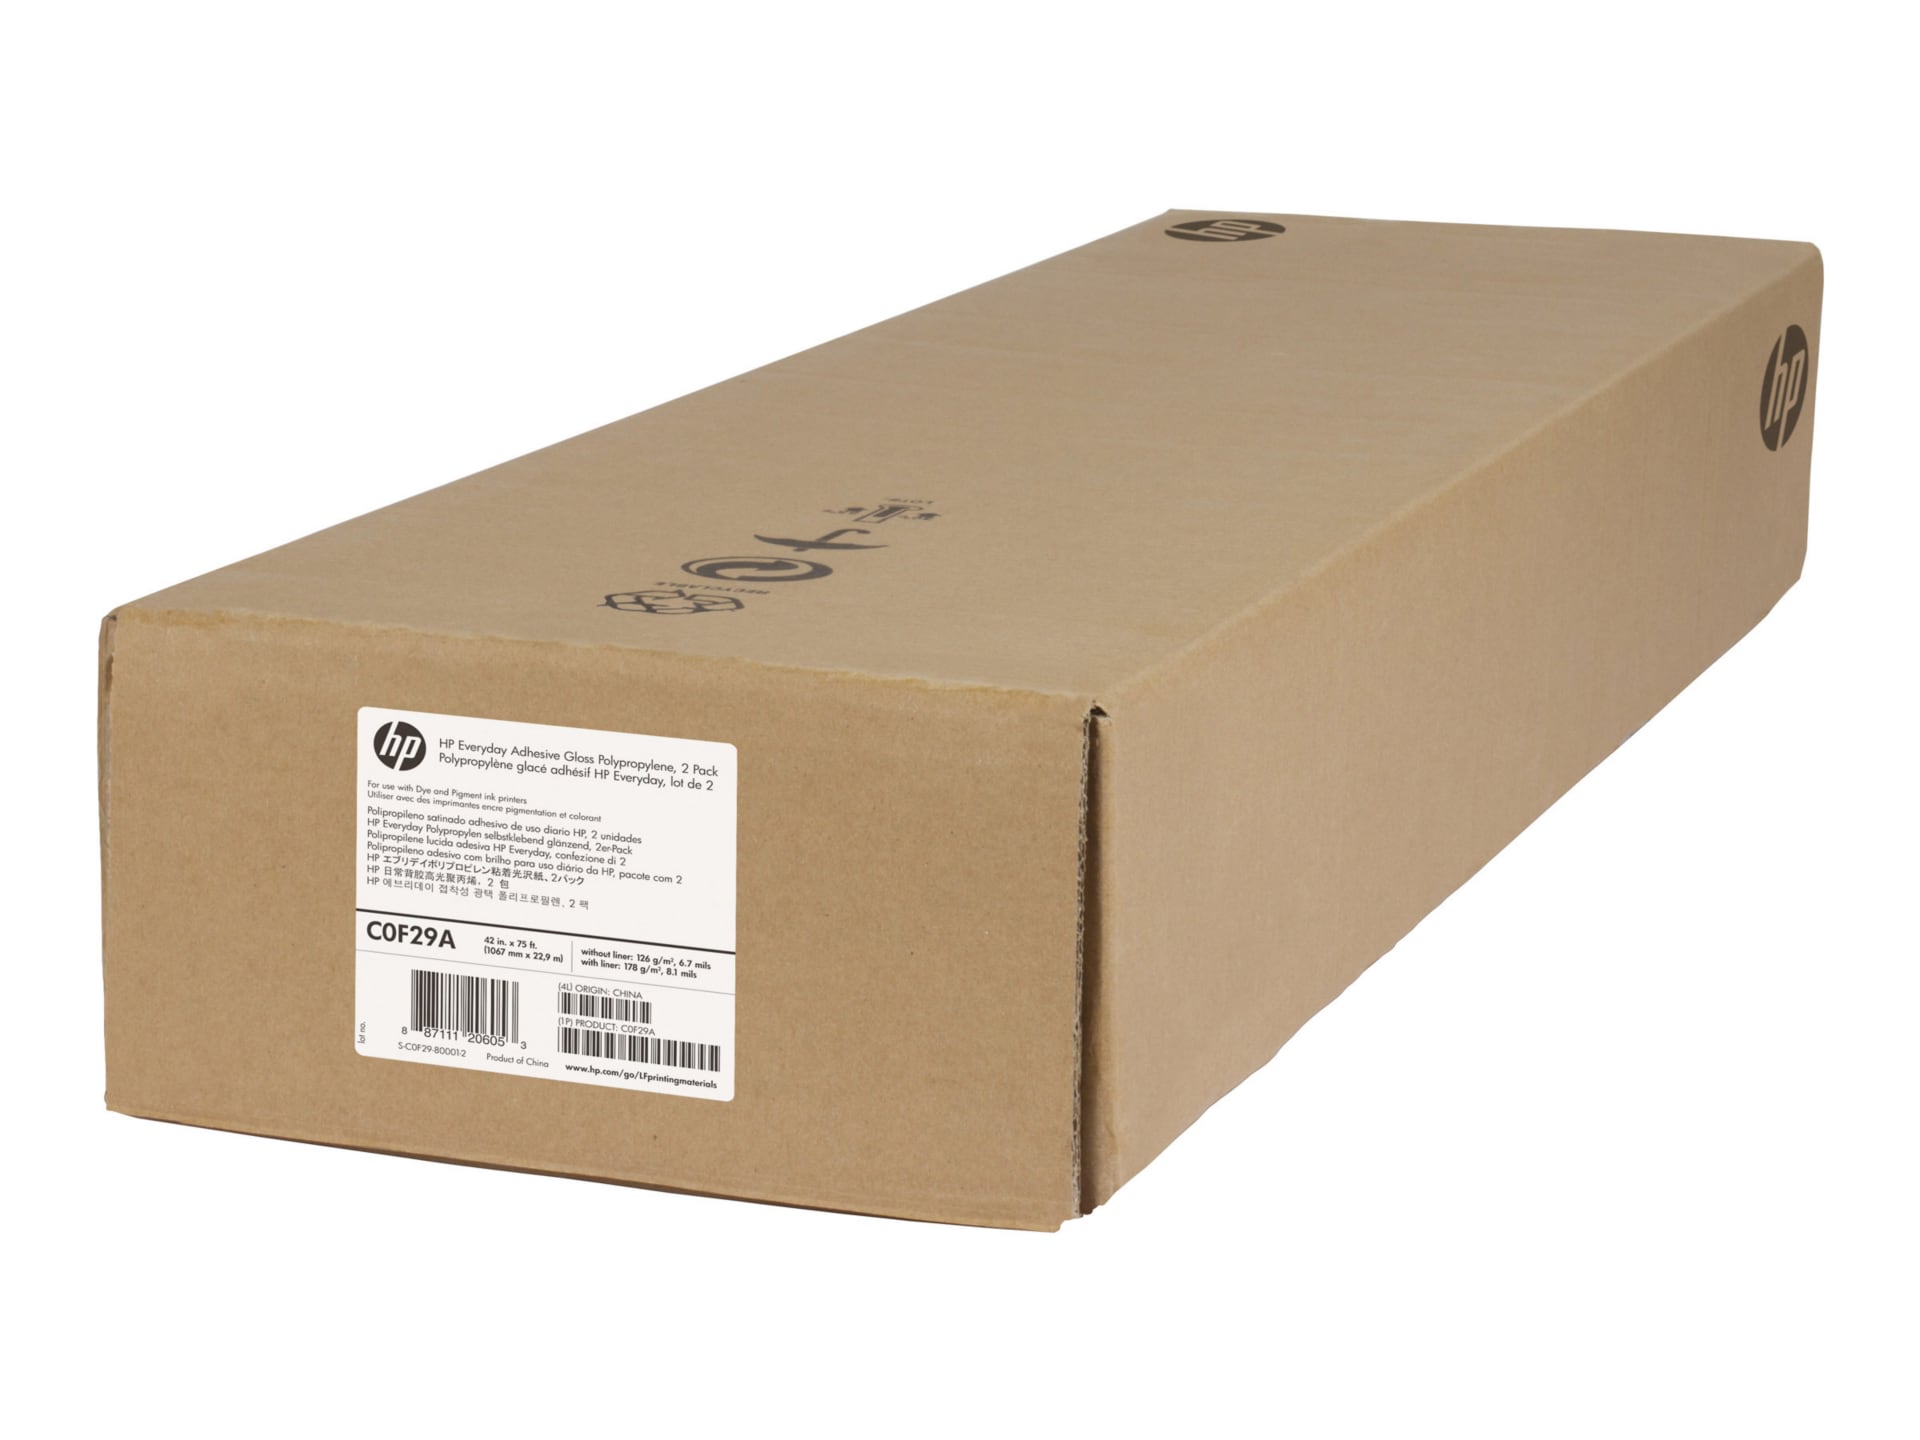 HP 2-Pack Everyday Adhesive Gloss Polypropylene-1067 mm x 22.9 m (42 in x 75 ft)